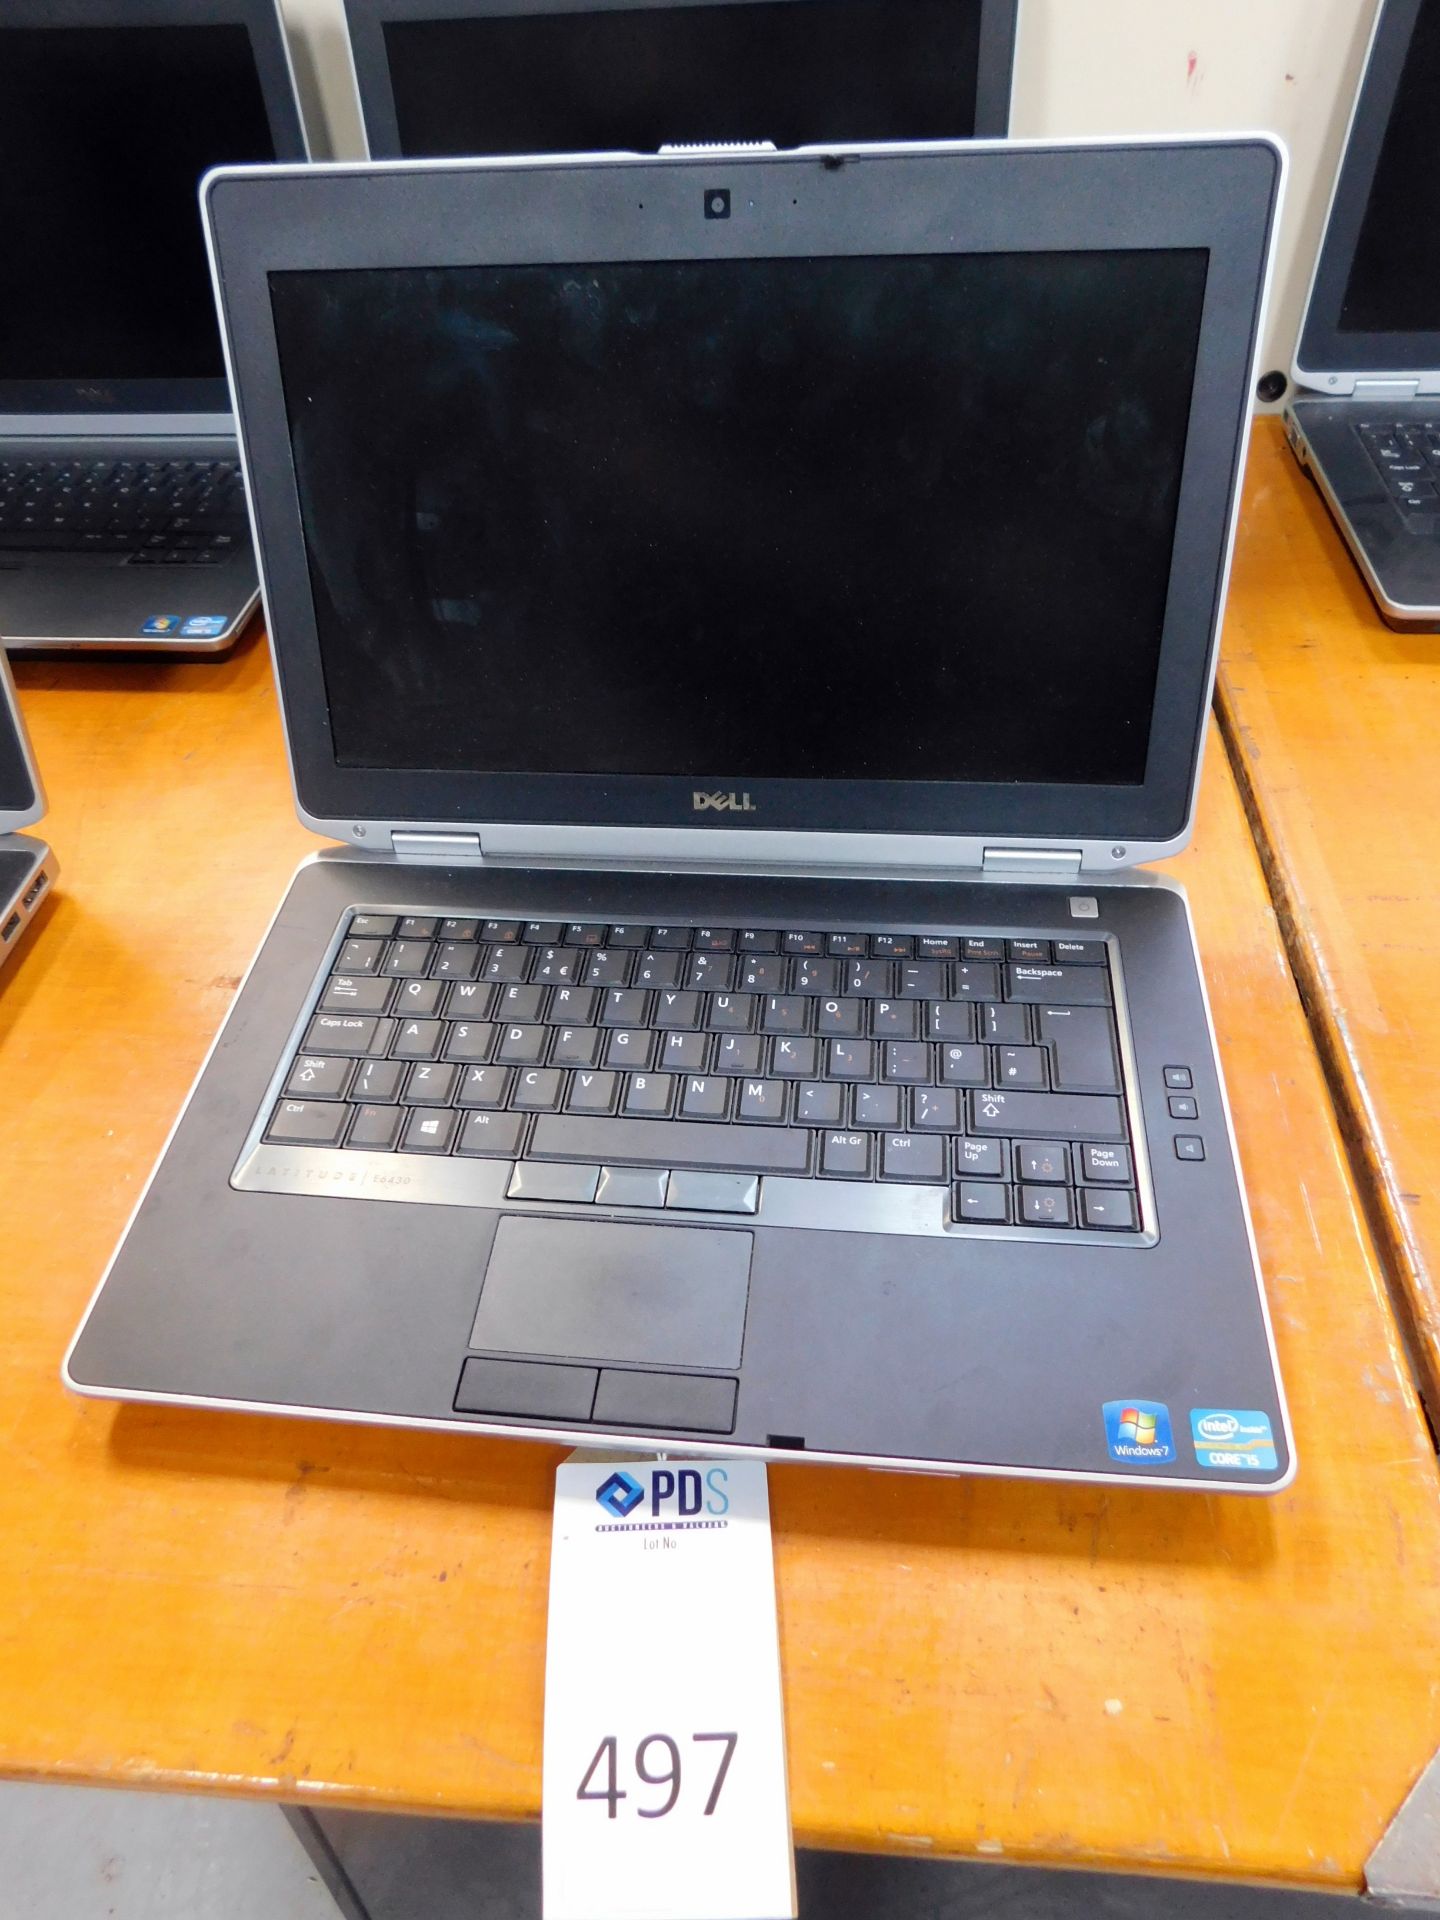 Dell Latitude E6430 Core I5 Laptop (No HDD) (Located Brentwood, See General Notes For More Details)